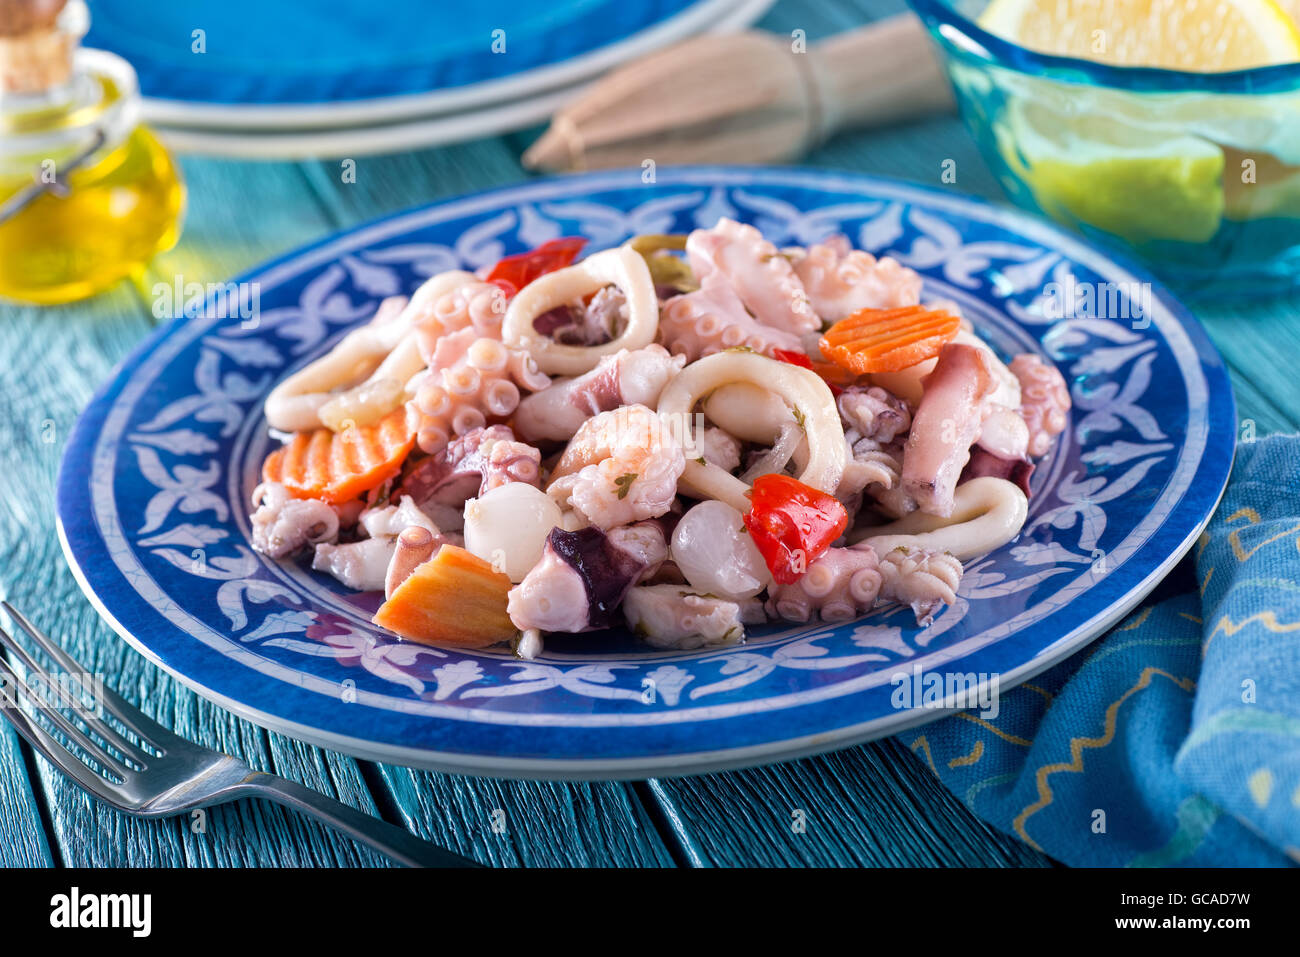 A delicious mixed seafood salad with octopus, calamari, shrimp, onions, red pepper, and carrot. Stock Photo